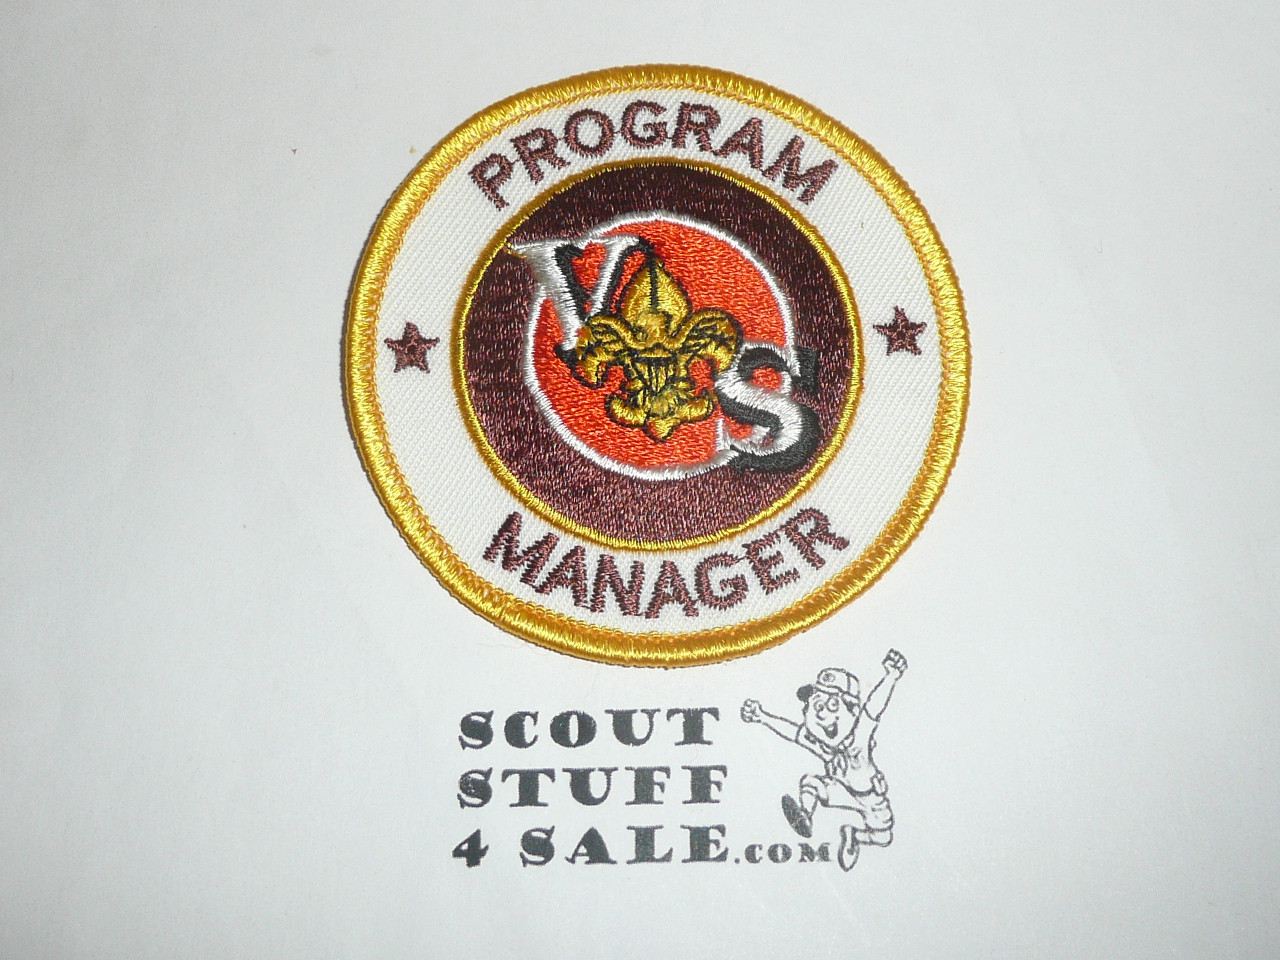 Varsity Scouting Position Patch, Program Manager